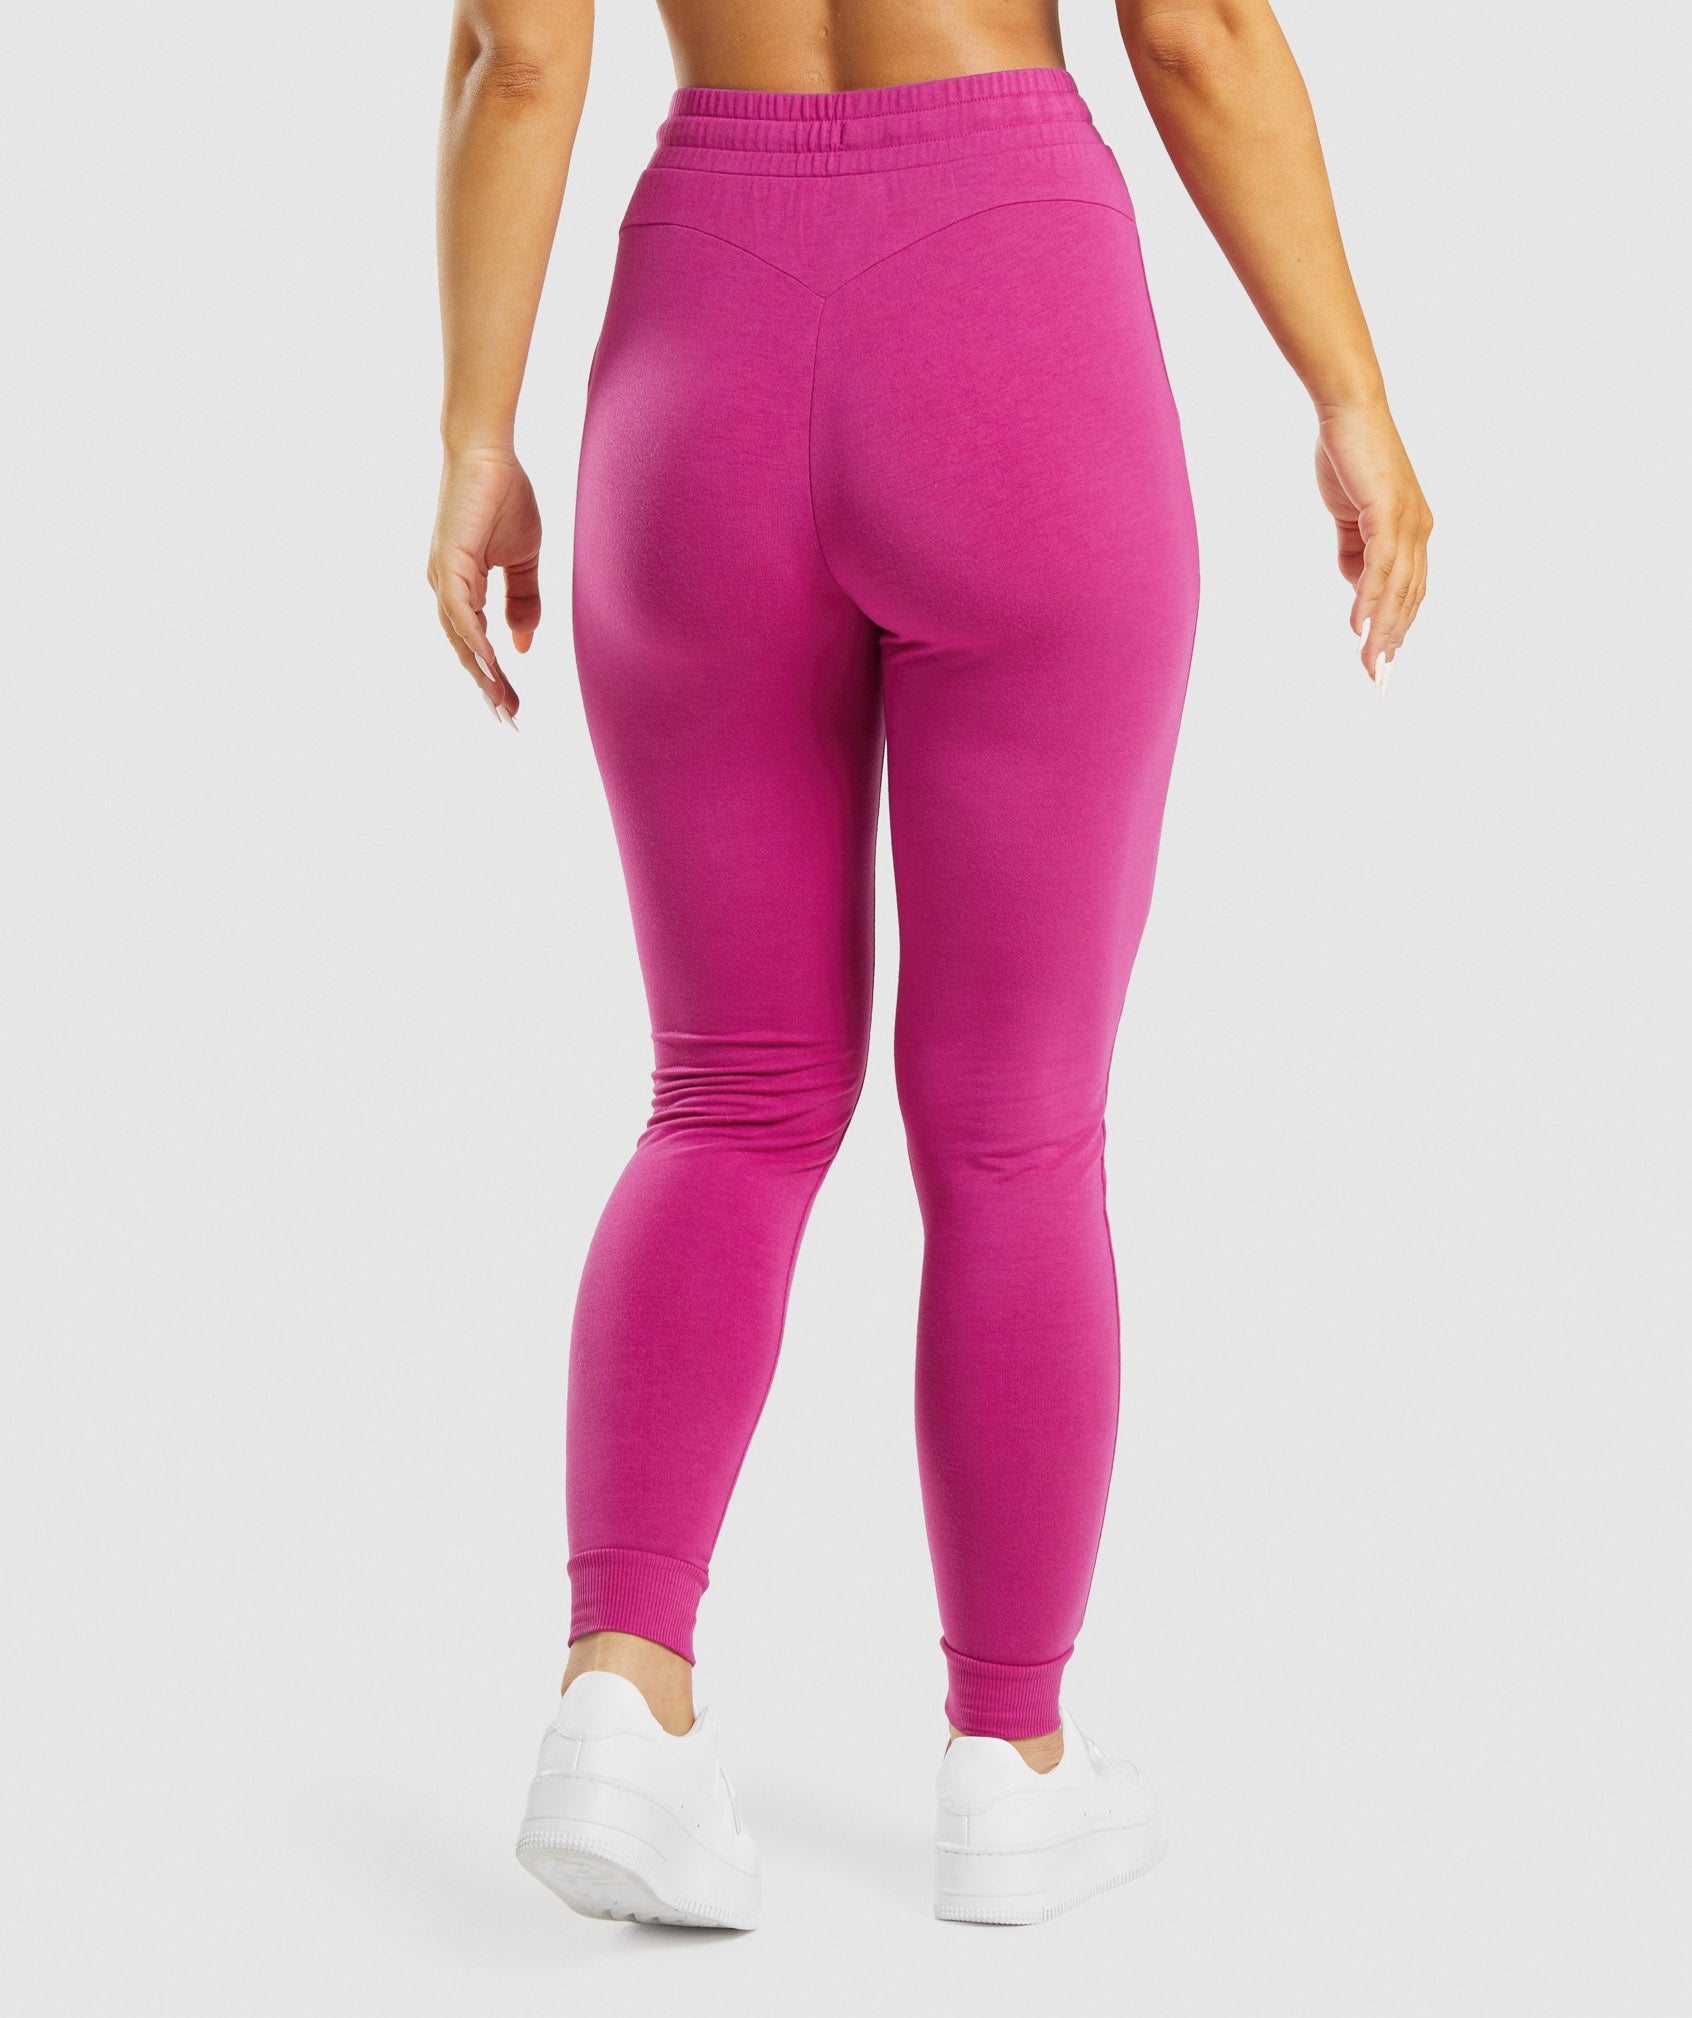 Gymshark Pippa Training Joggers in Mauve Size S